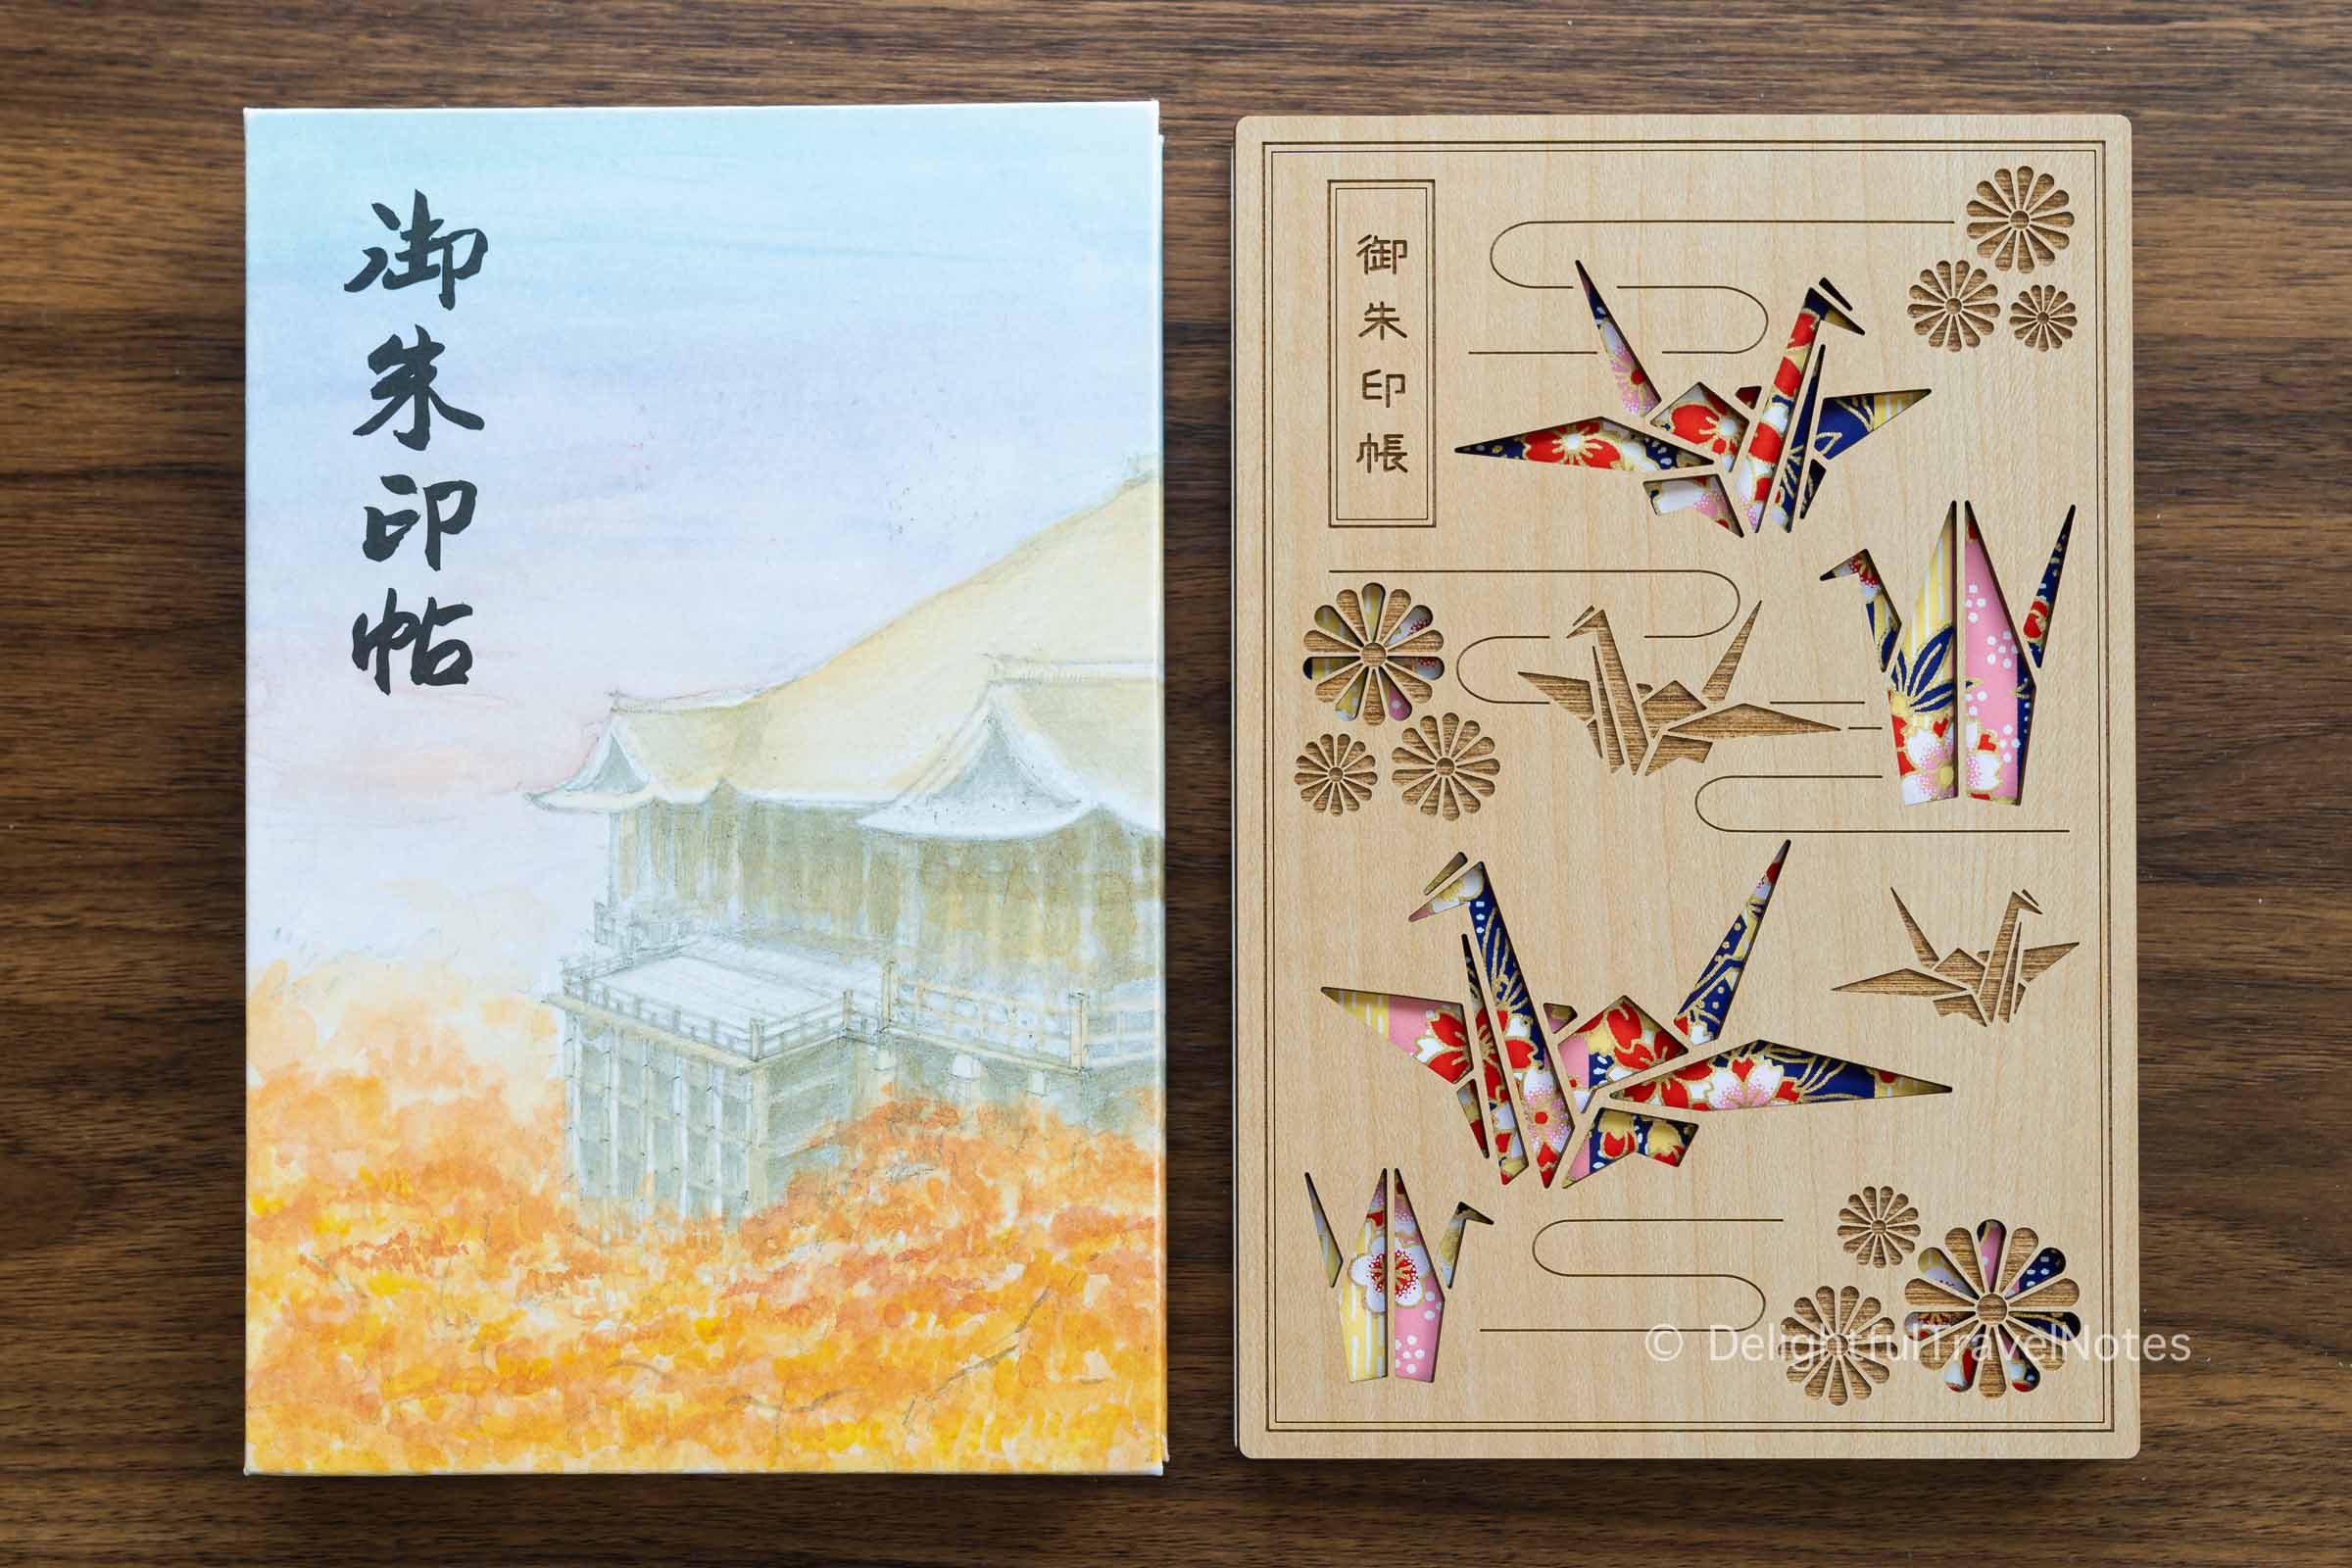 two goshuin-cho books on the desk